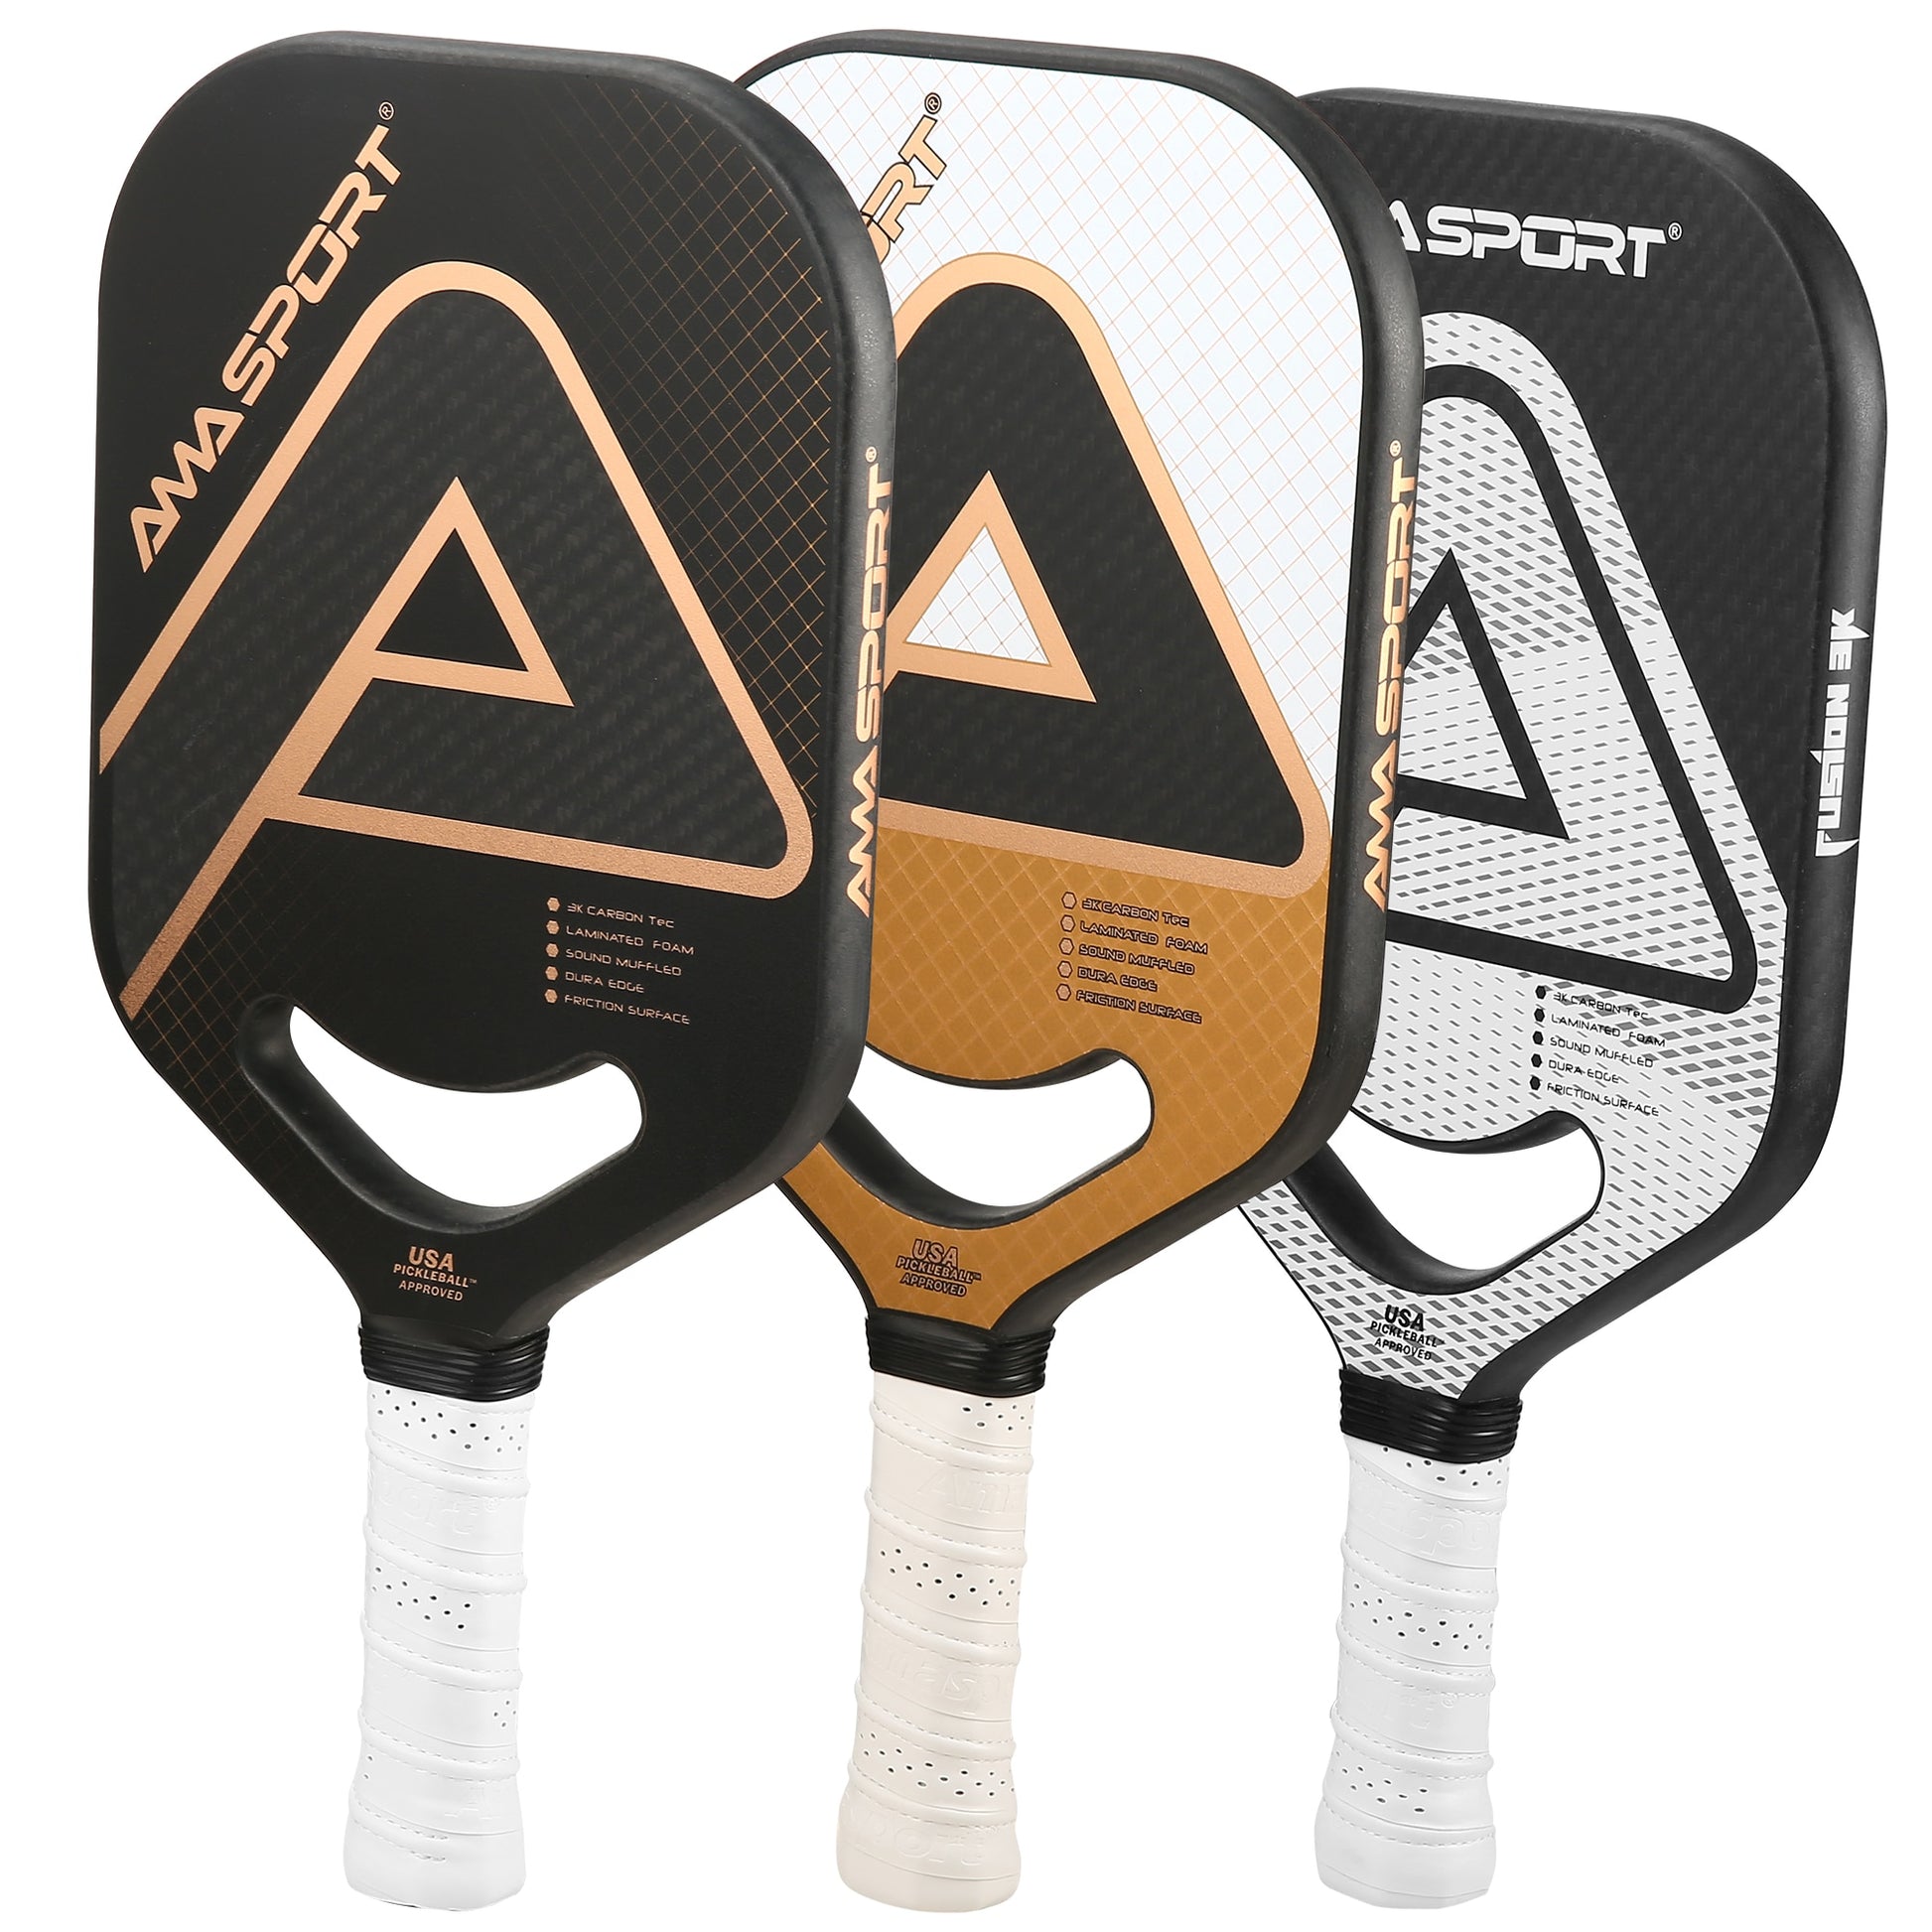 What is the Best Material for Pickleball Paddles